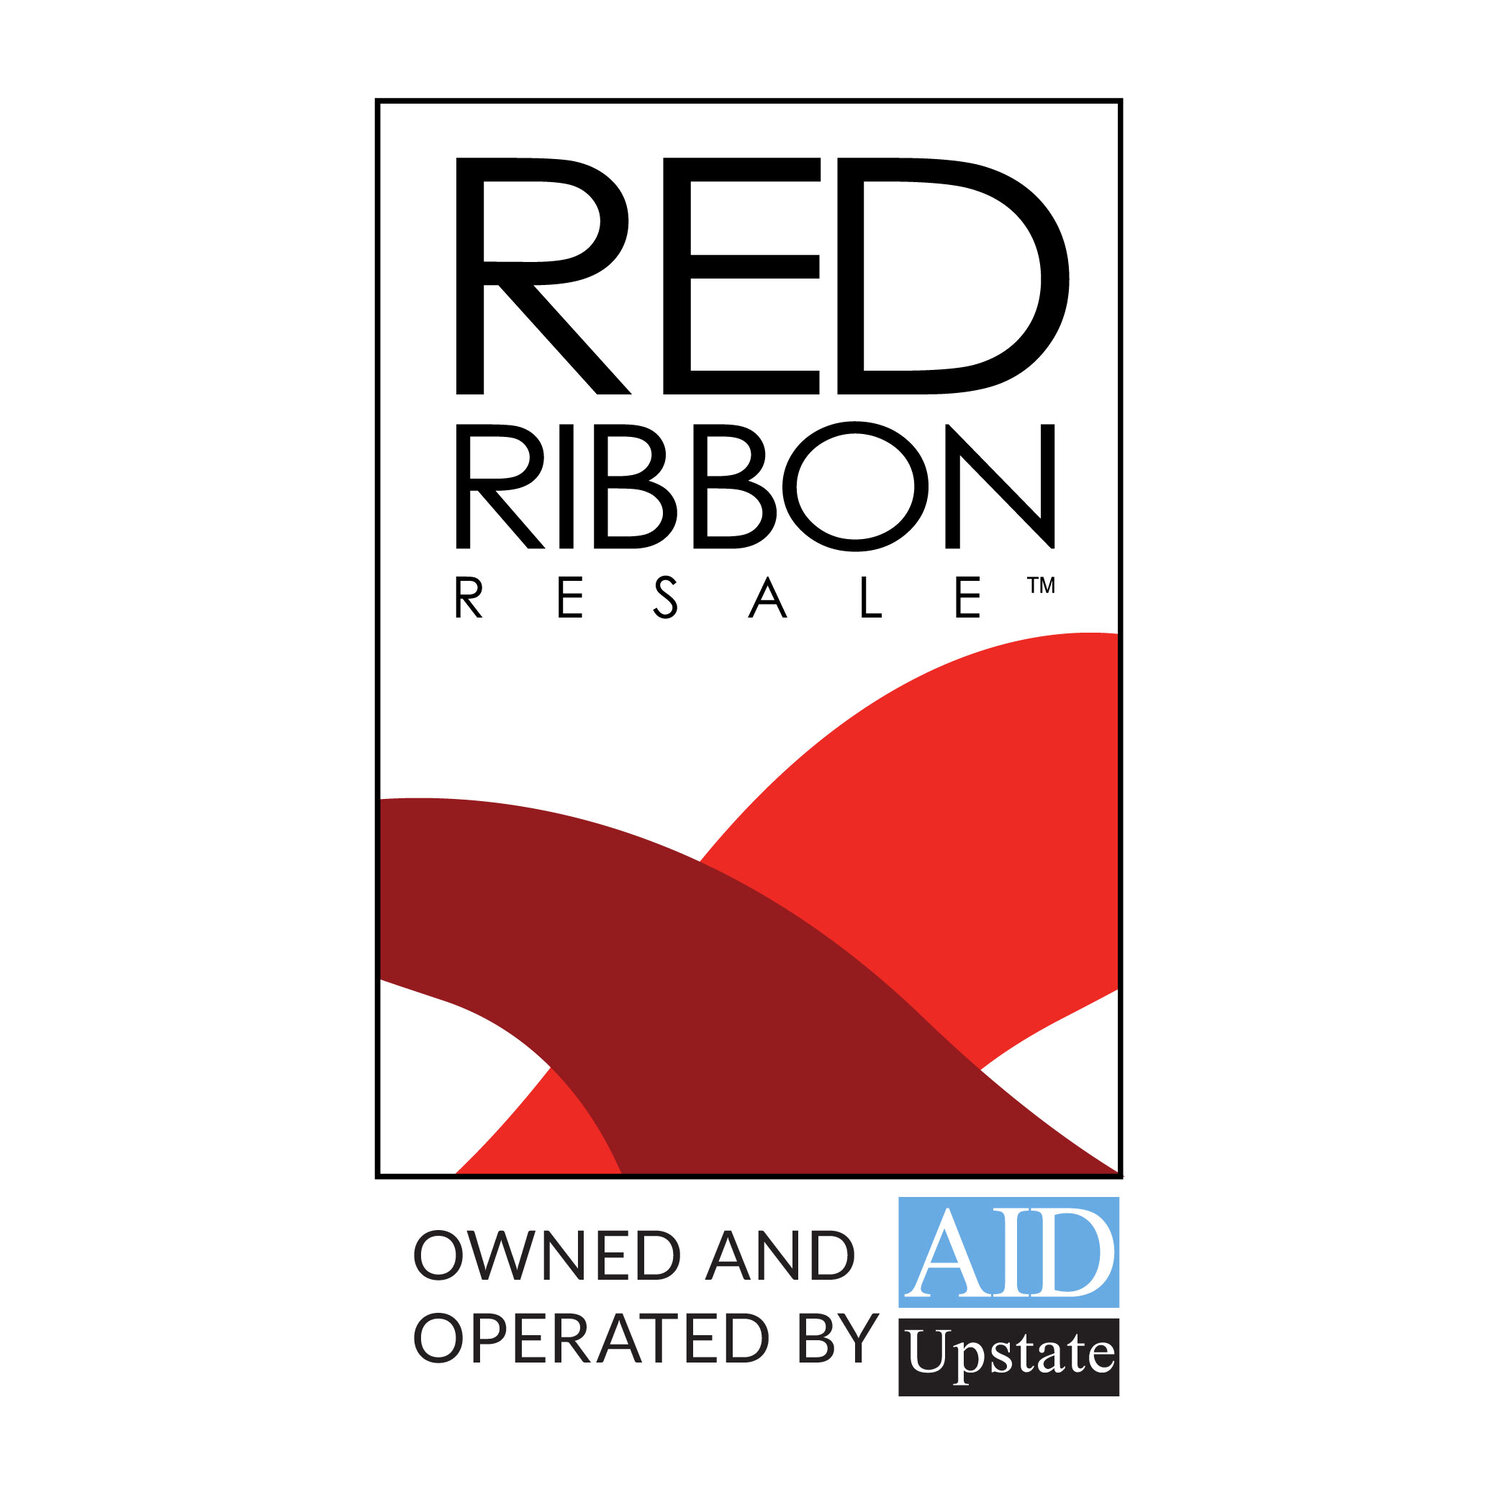 ABOUT US — Red Ribbon Resale